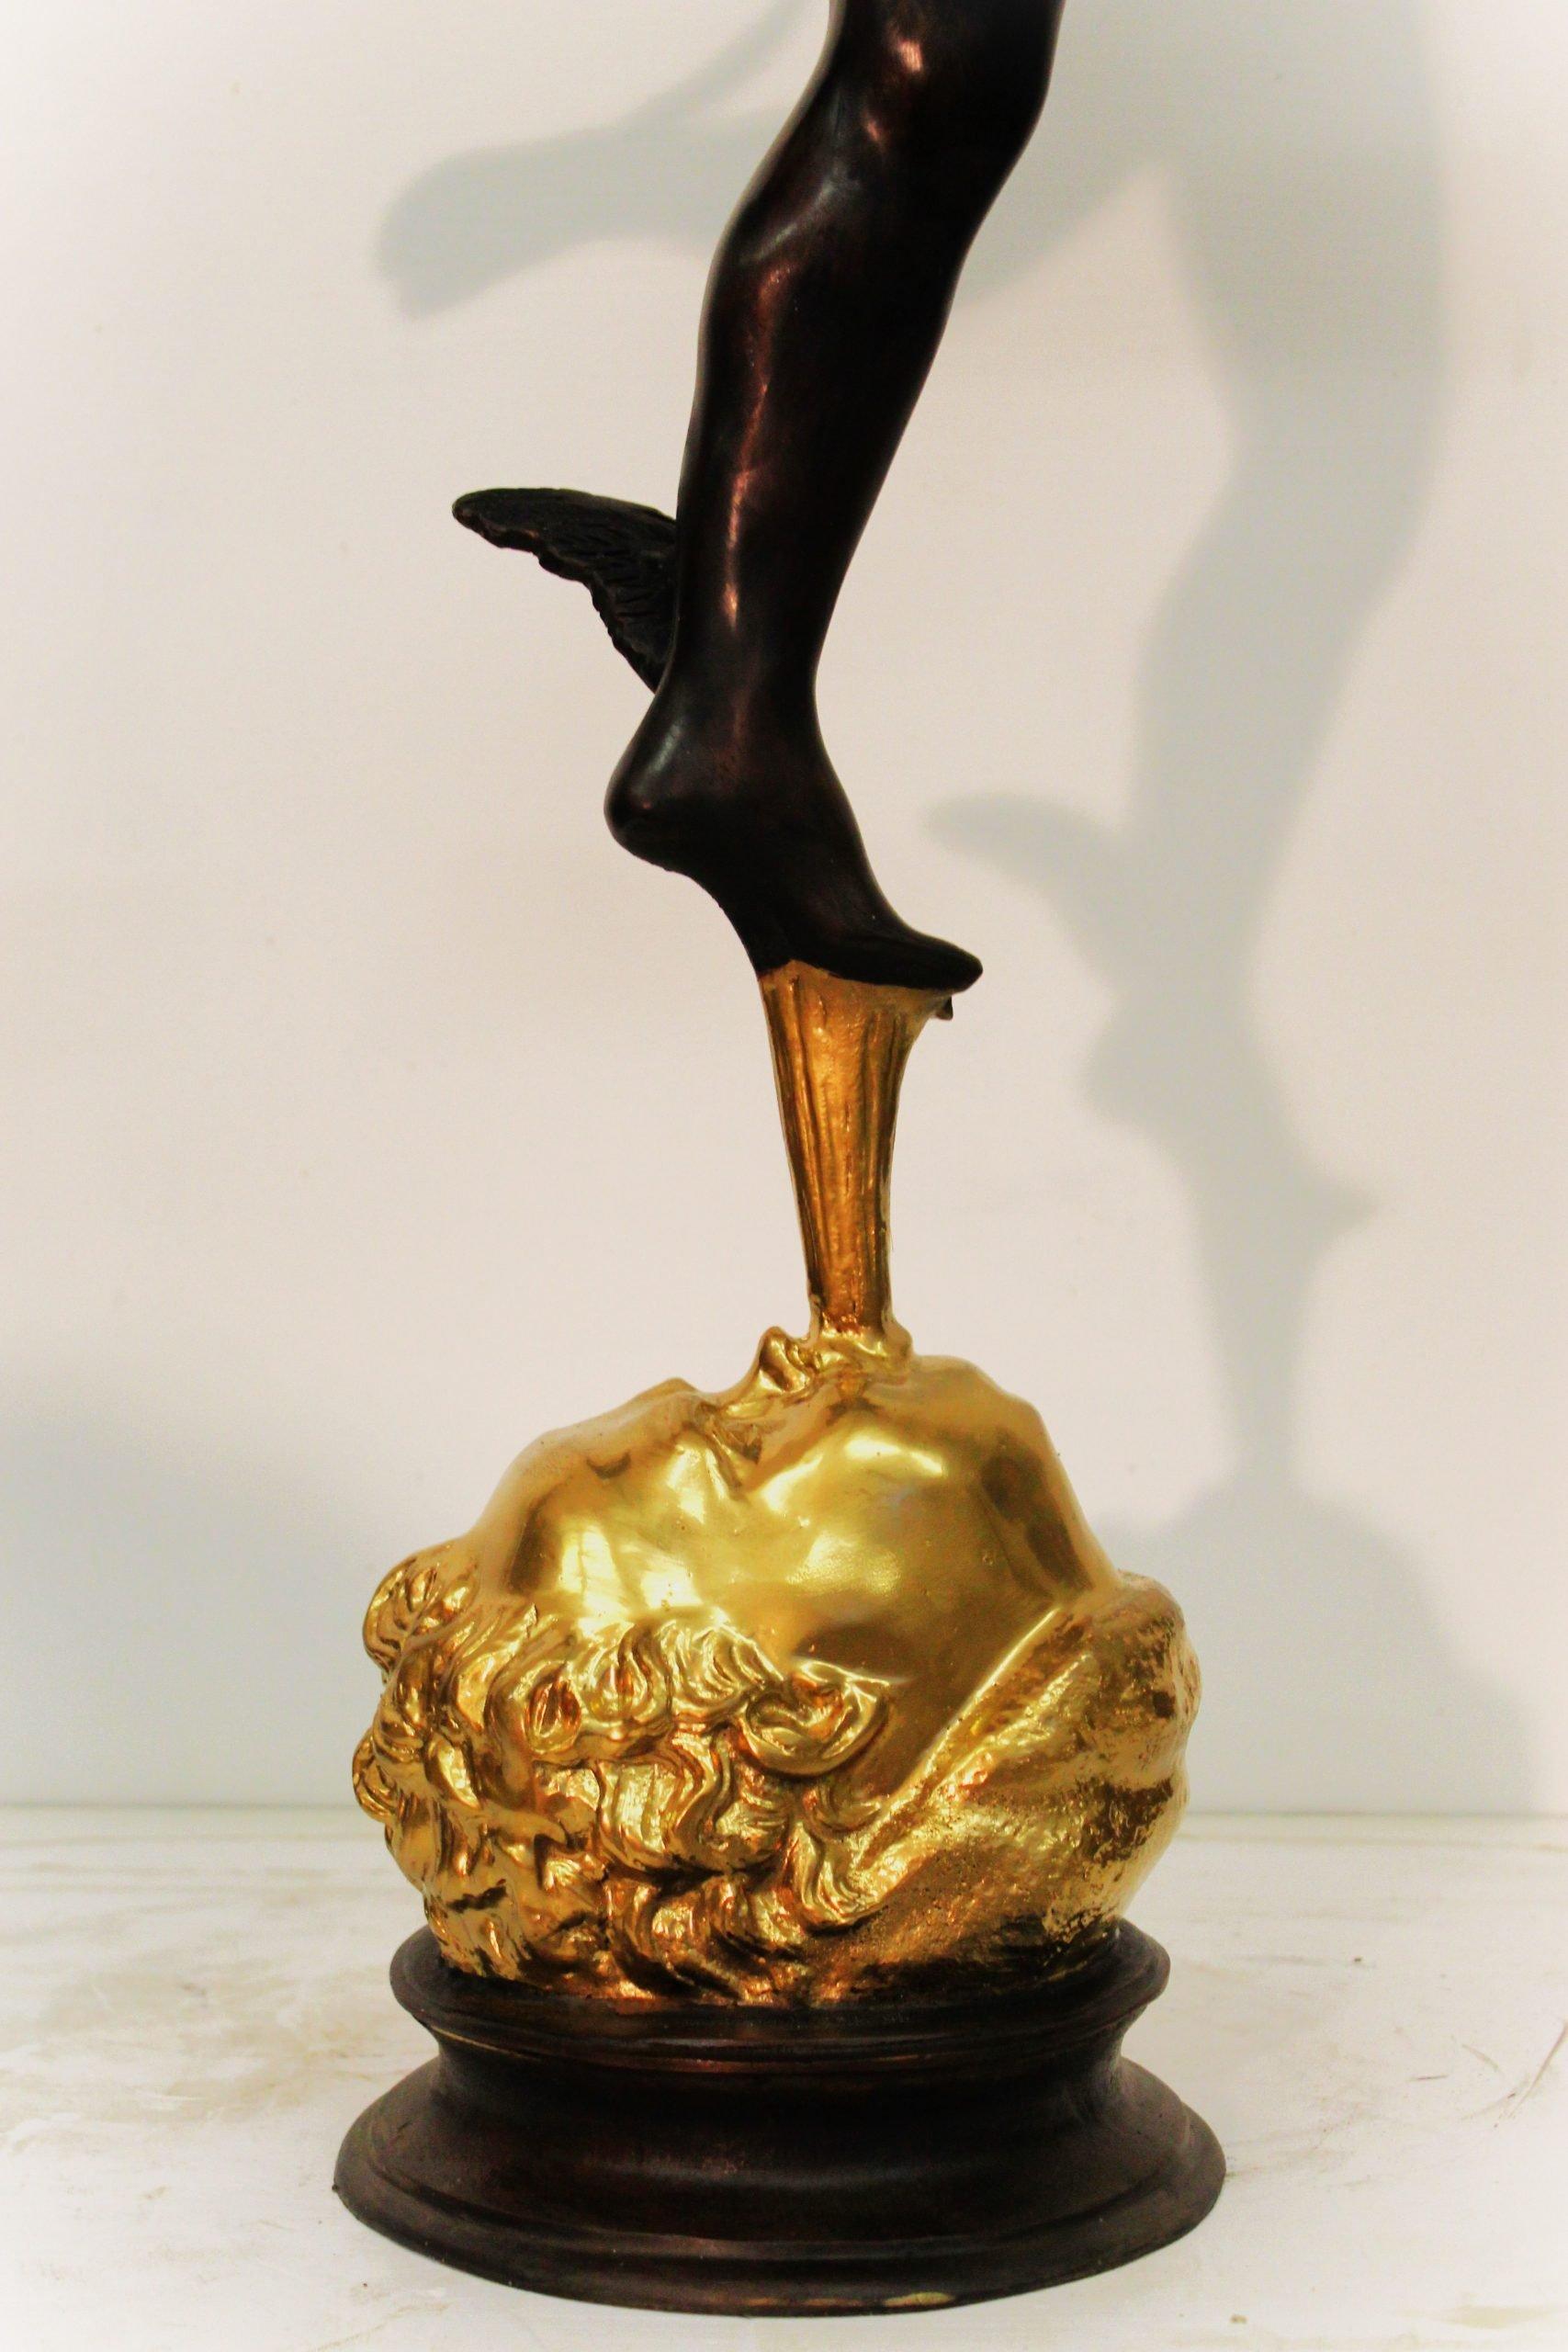 Description
Sculpture of winged Mercury in bronze, with parts in gilded bronze, late 20th century. ADDITIONAL PHOTOS, INFORMATION OF THE LOT AND SHIPPING INFORMATION CAN BE REQUEST BY SENDING AN EMAIL.
Indicative shipping costs in Italy: 150€ and